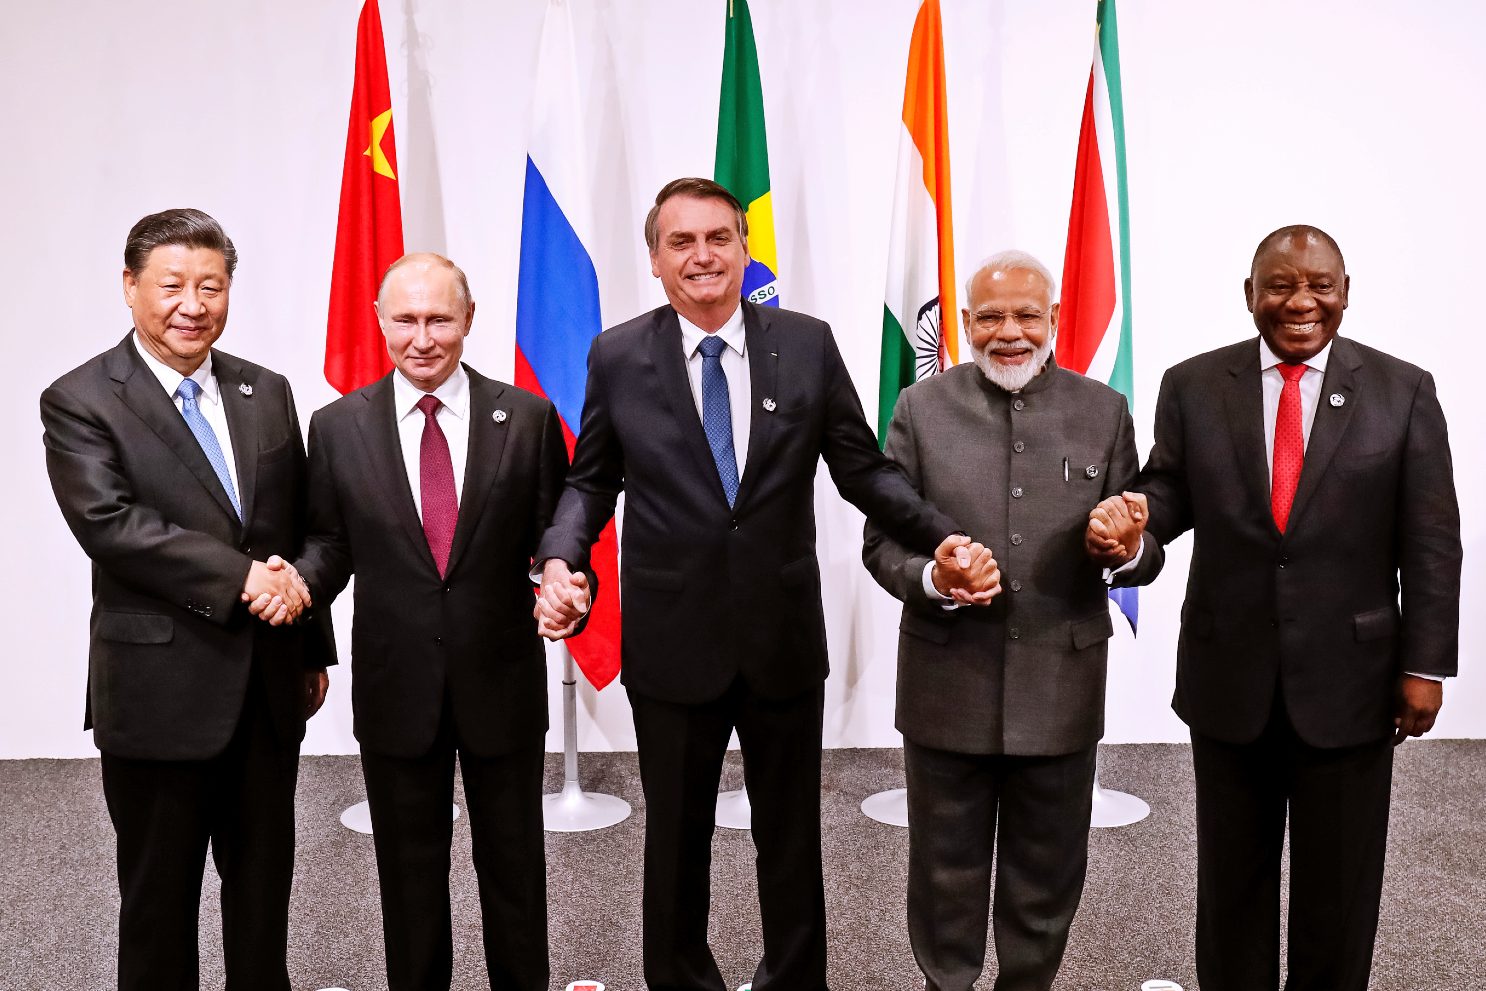 The leaders of the BRICS nations.